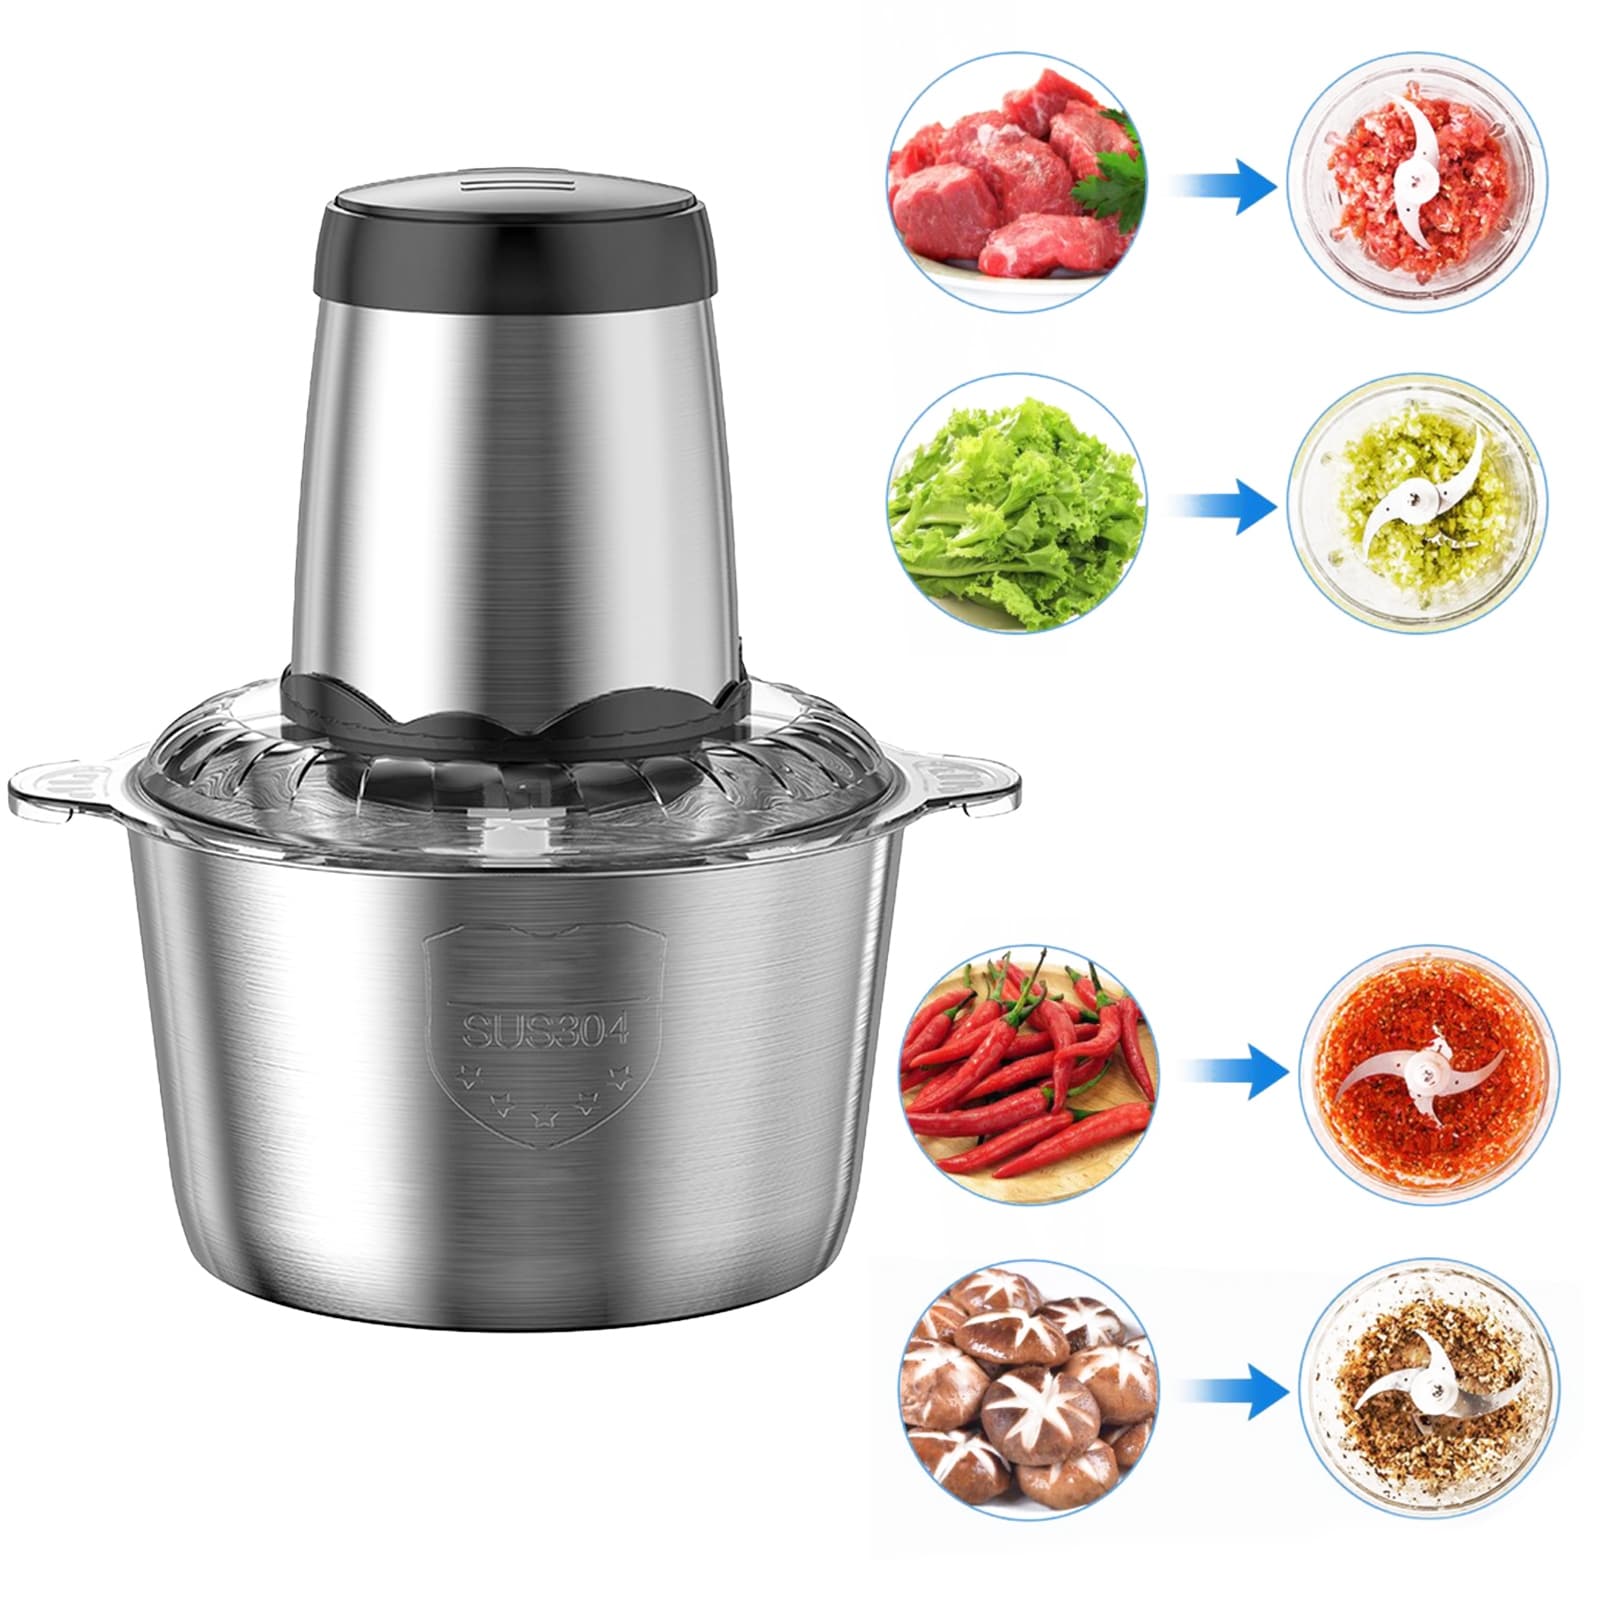 Meat Grinder Food Processor Stainless Steel Meat Blender Food Chopper -  7.4x10.3 Overall - On Sale - Bed Bath & Beyond - 35088100